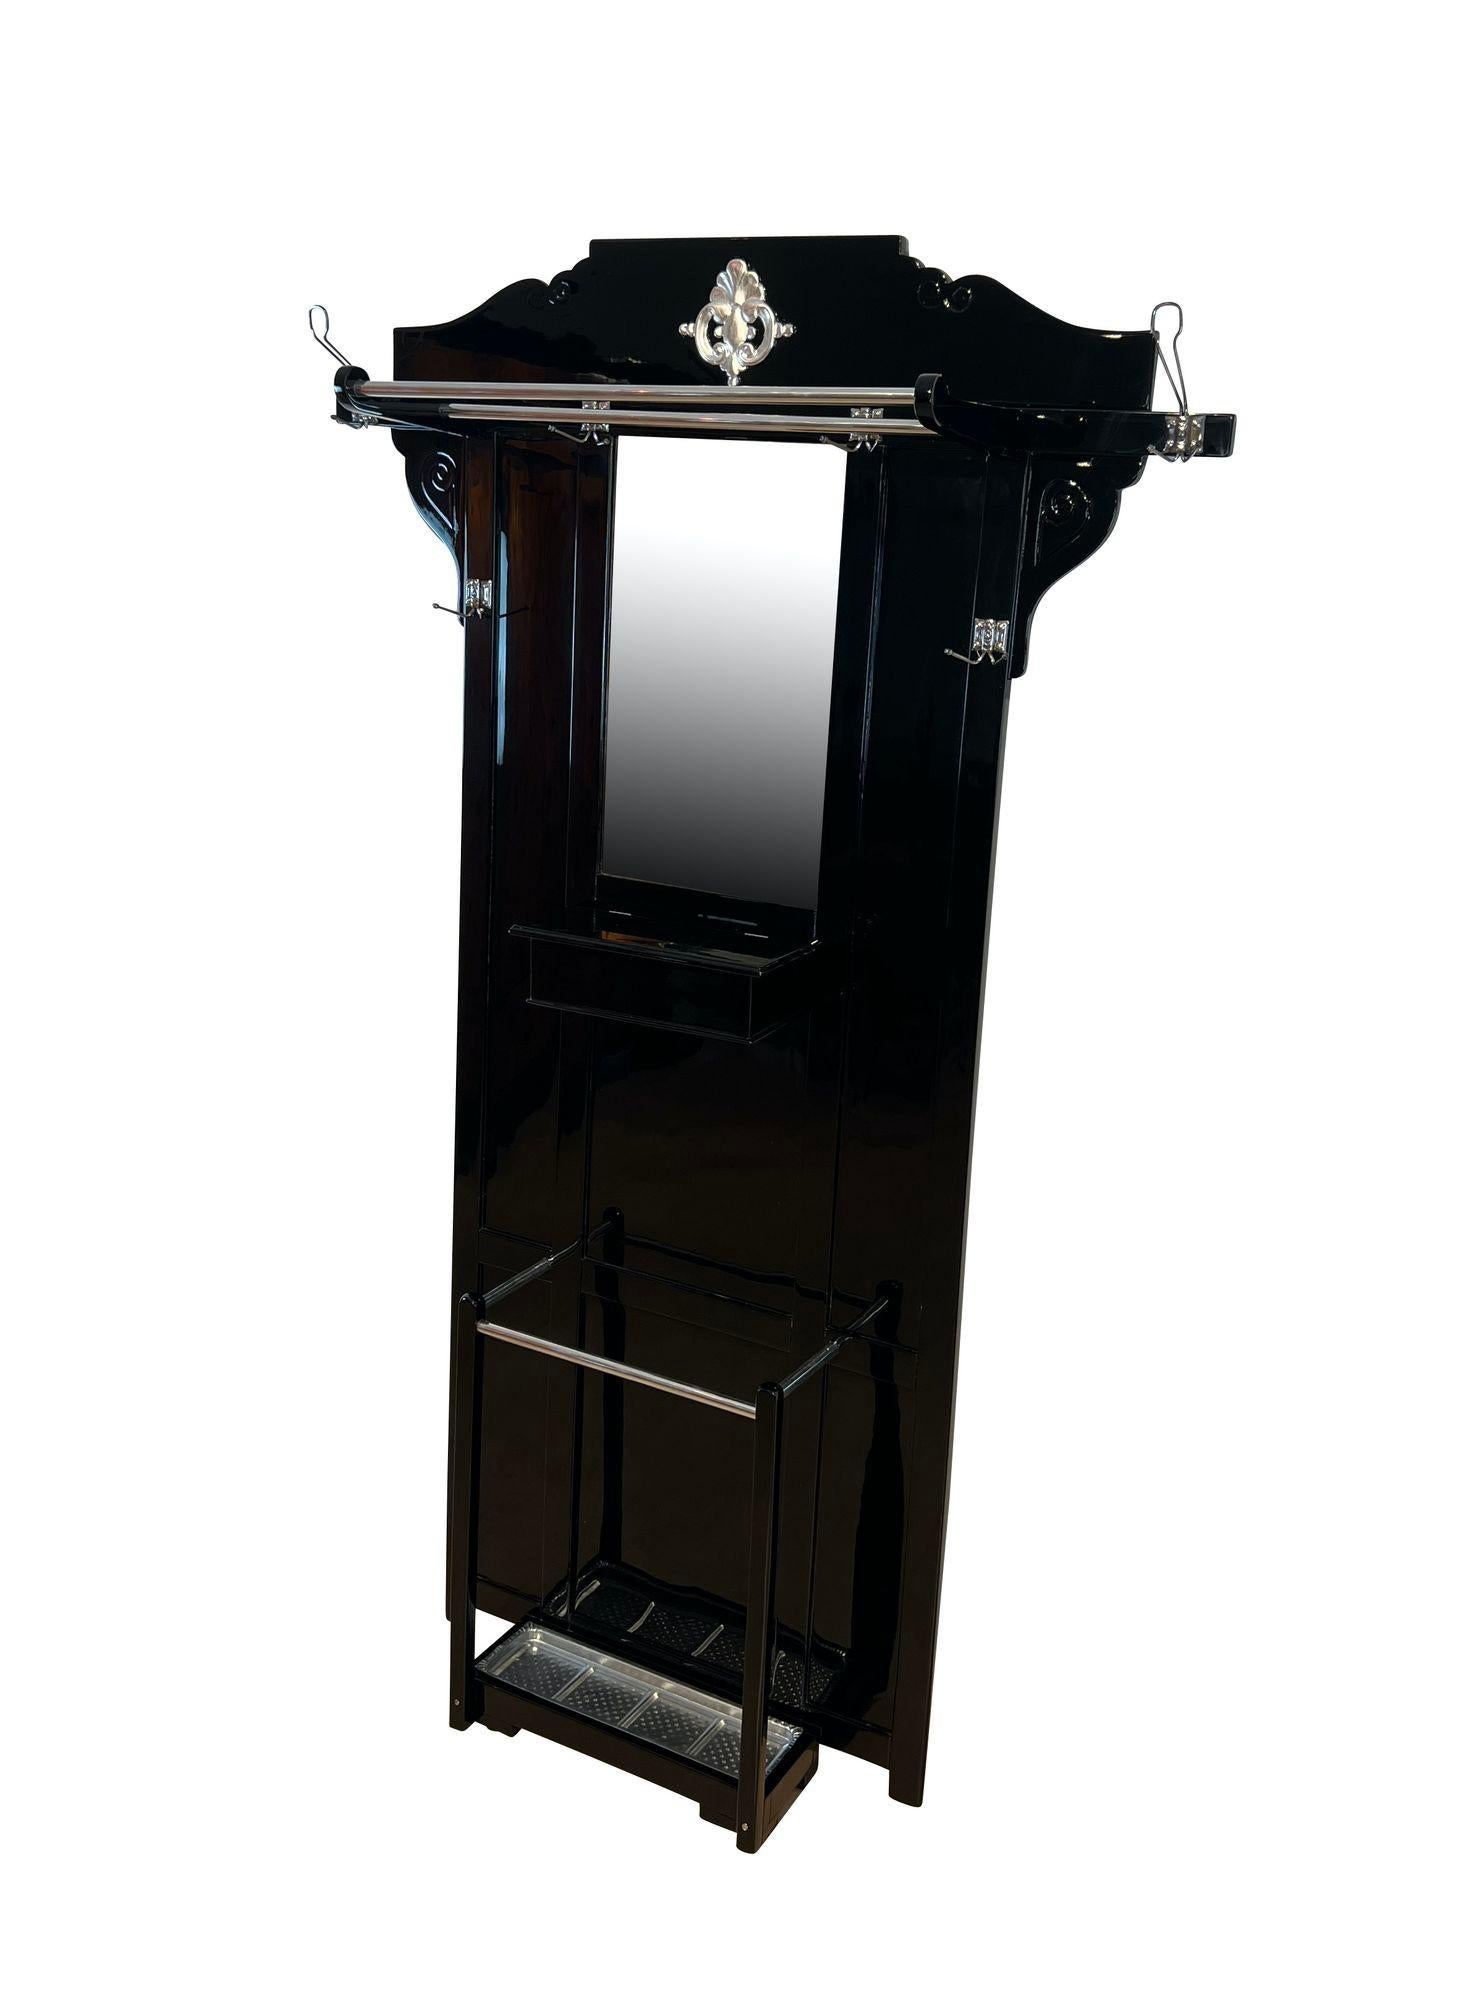 Original Art Deco wardrobe in black piano lacquer and silver-leaf from Germany around 1925.
Oak and beech solid wood, lacquered in black high-gloss with piano lacquer. Silver-leaf ornament in the center at the top. Original mirror glass with facet